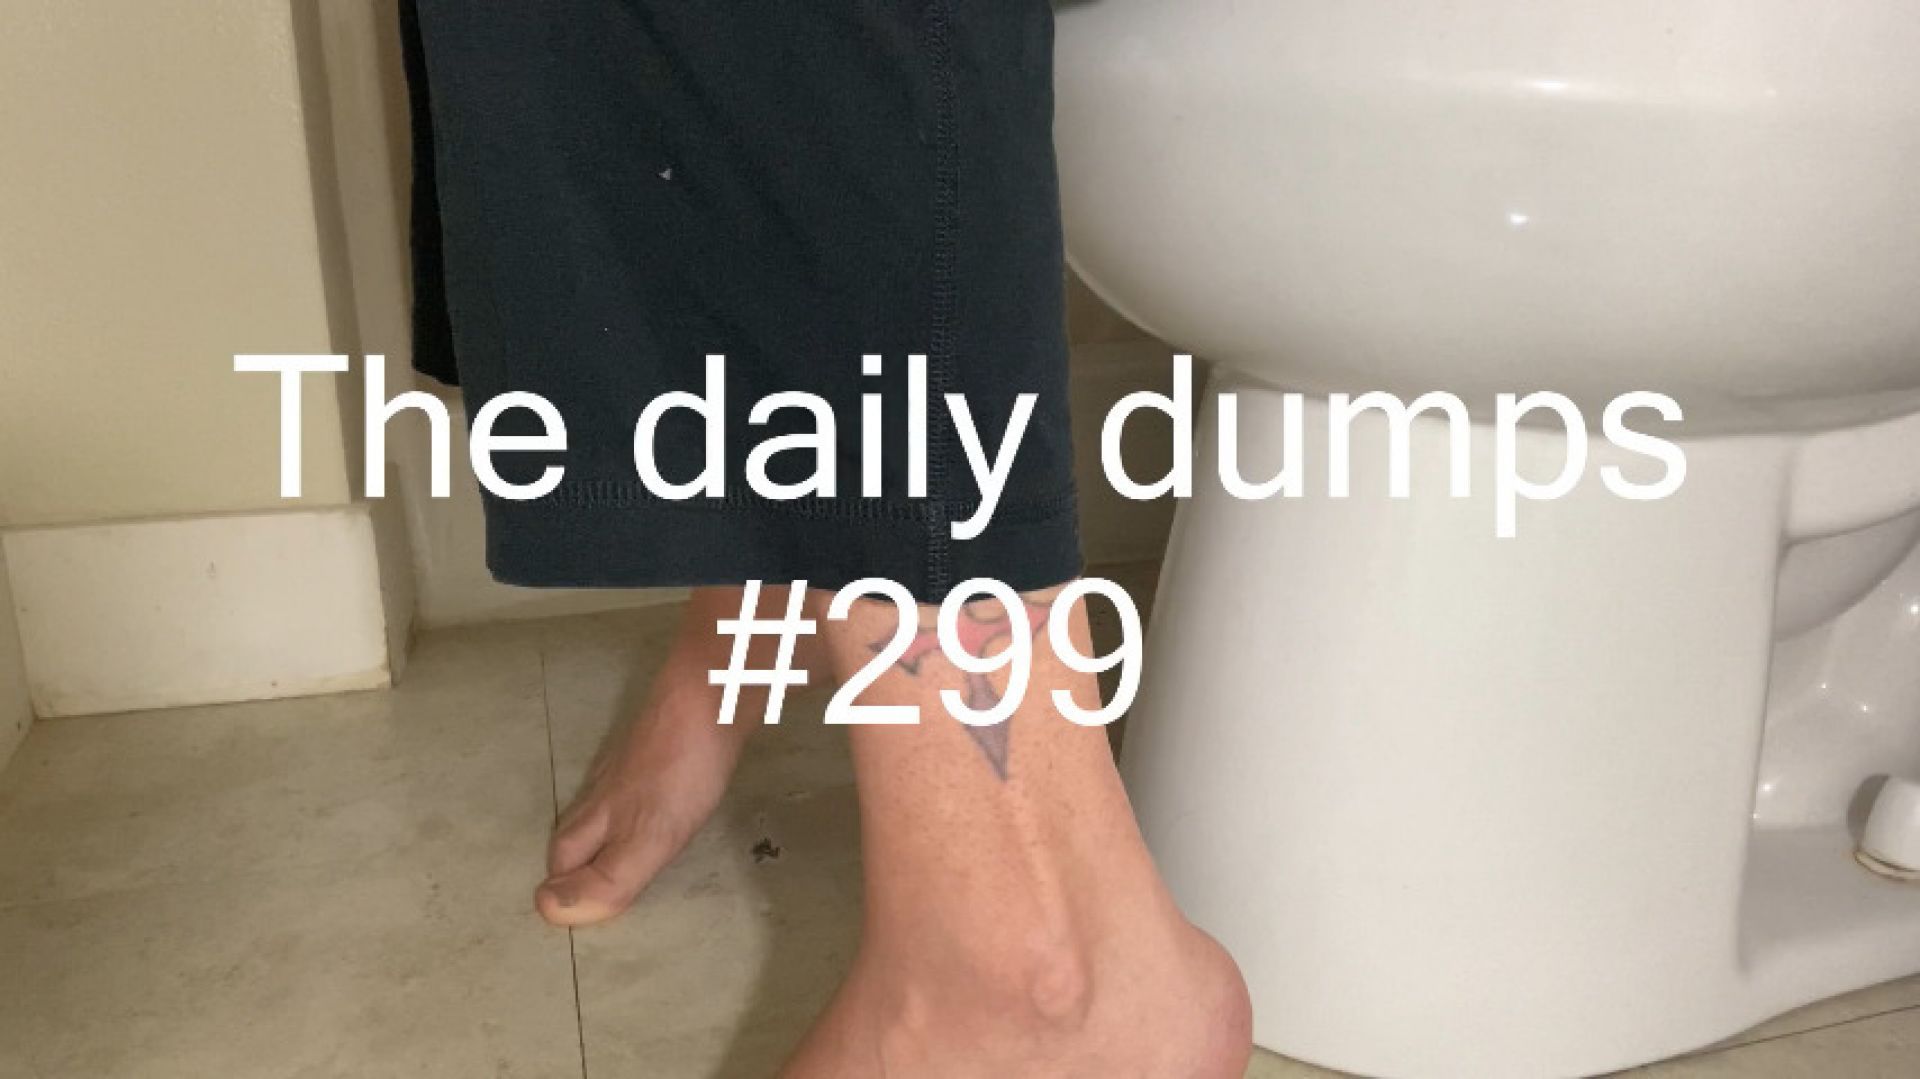 The daily dumps #299